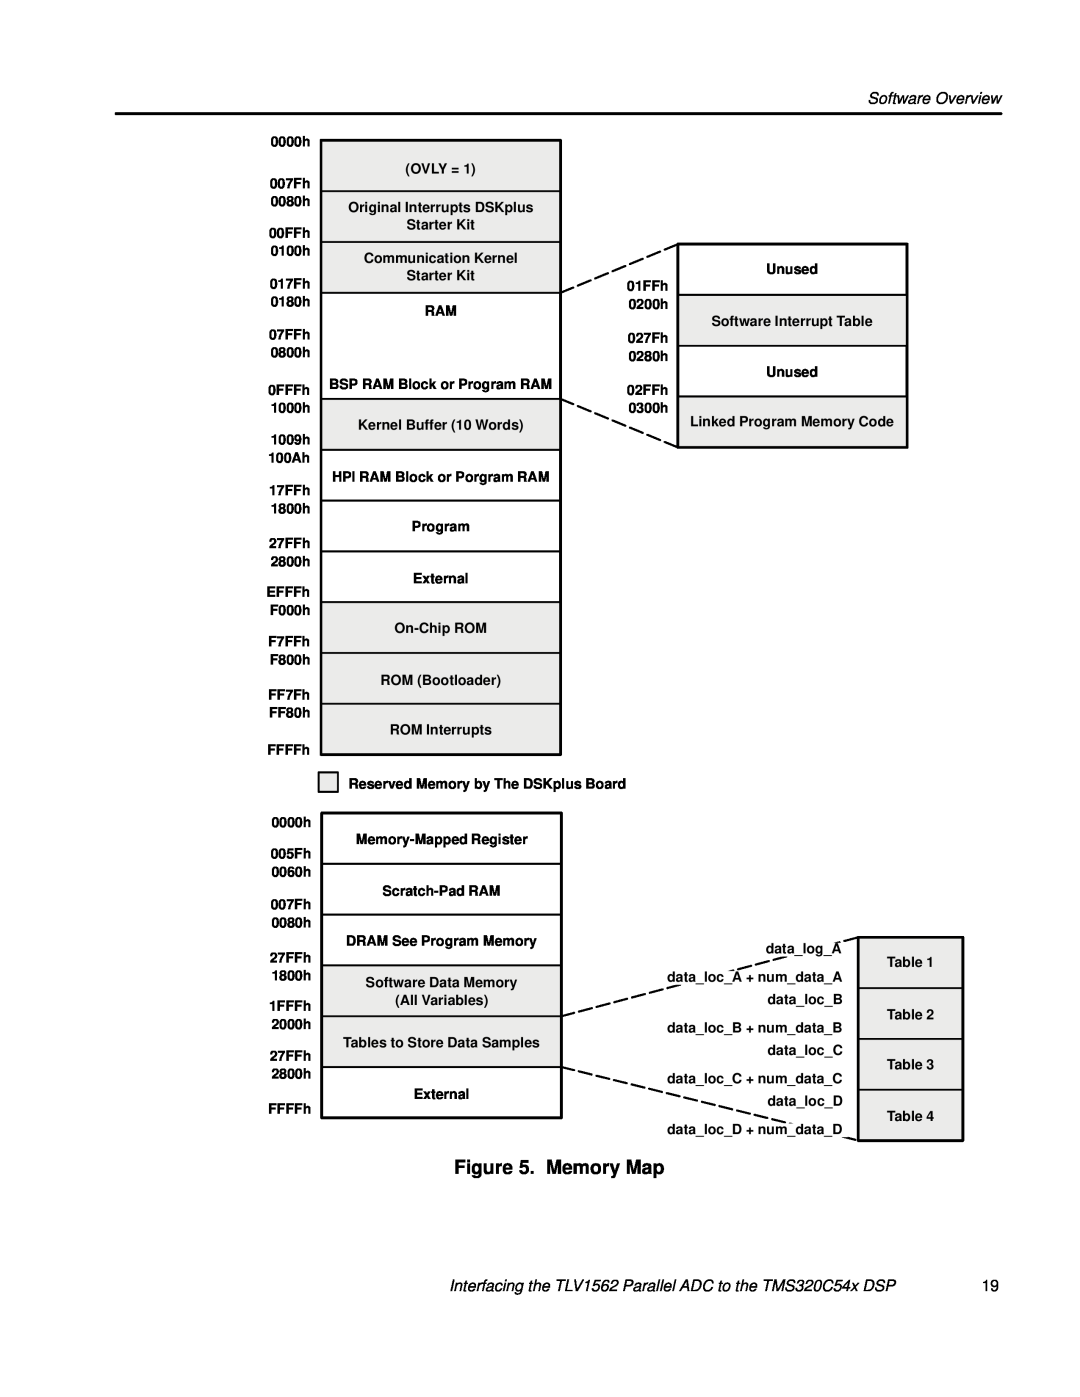 Texas Instruments manual Memory Map, Software Overview, Interfacing the TLV1562 Parallel ADC to the TMS320C54x DSP 